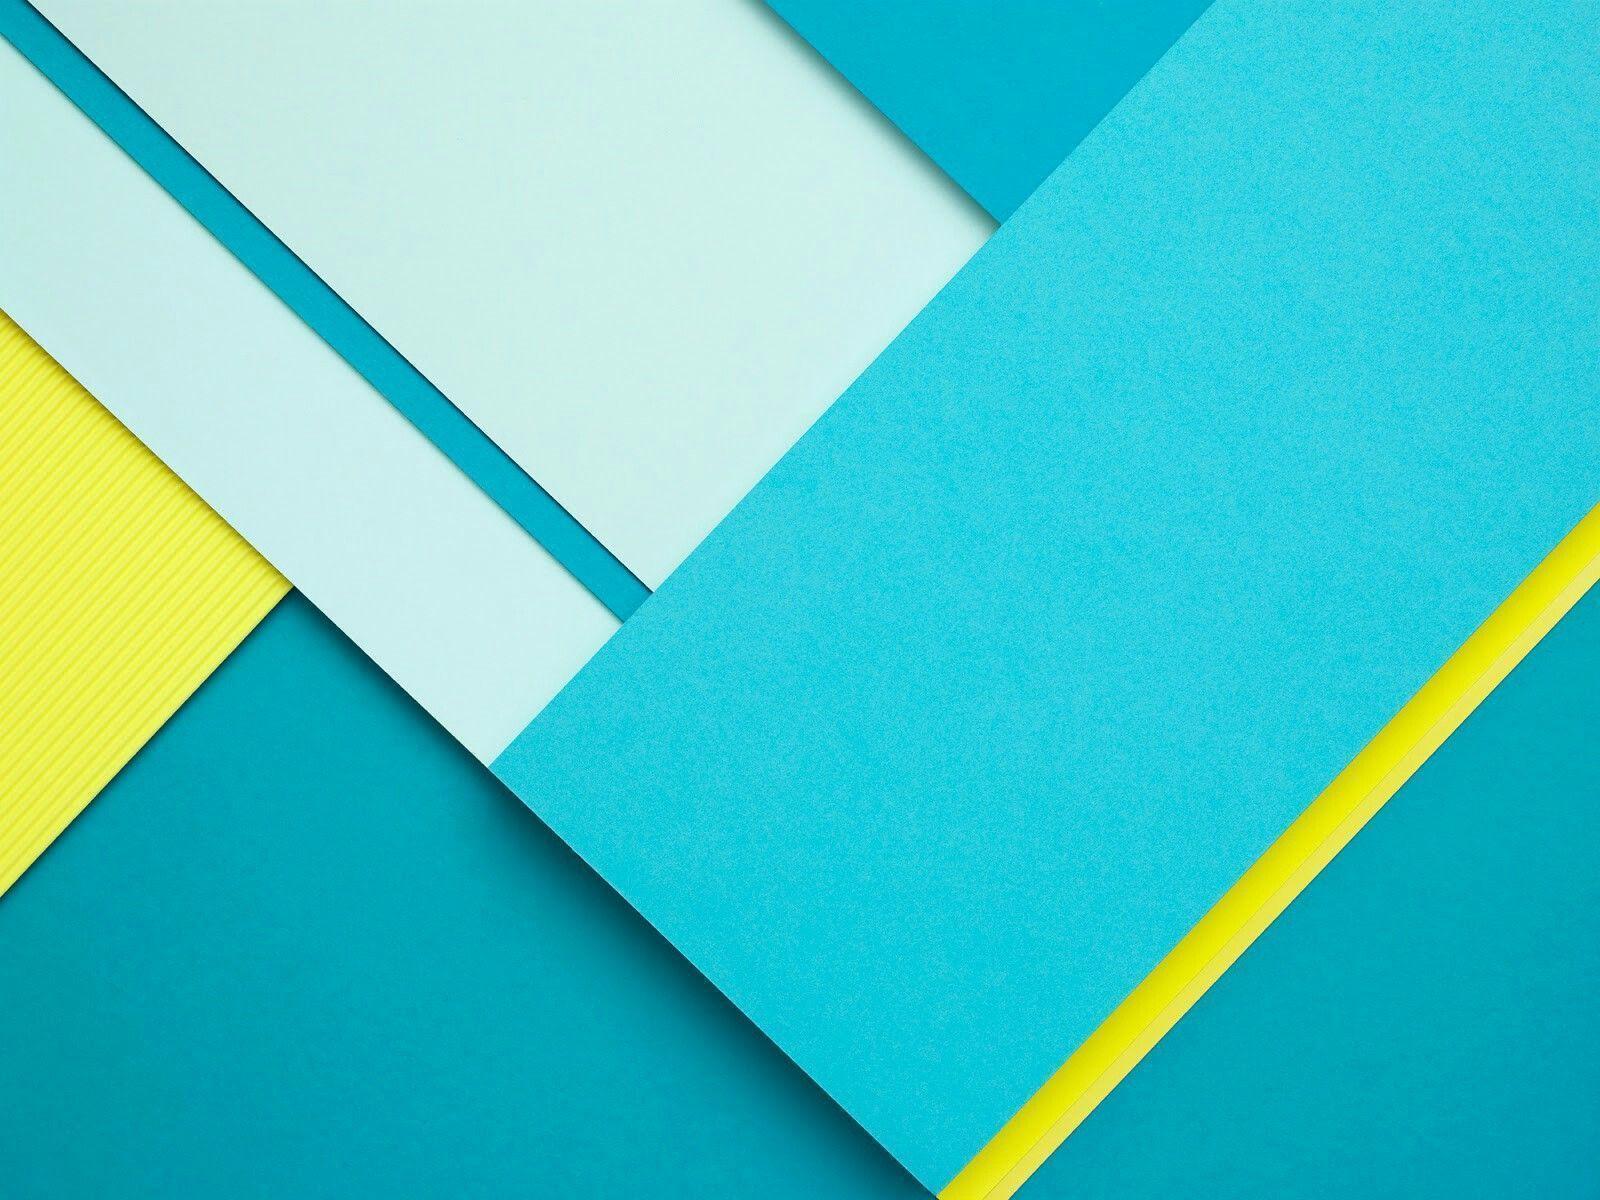 Android 5.0 Lollipop wallpaper: see the full pack here